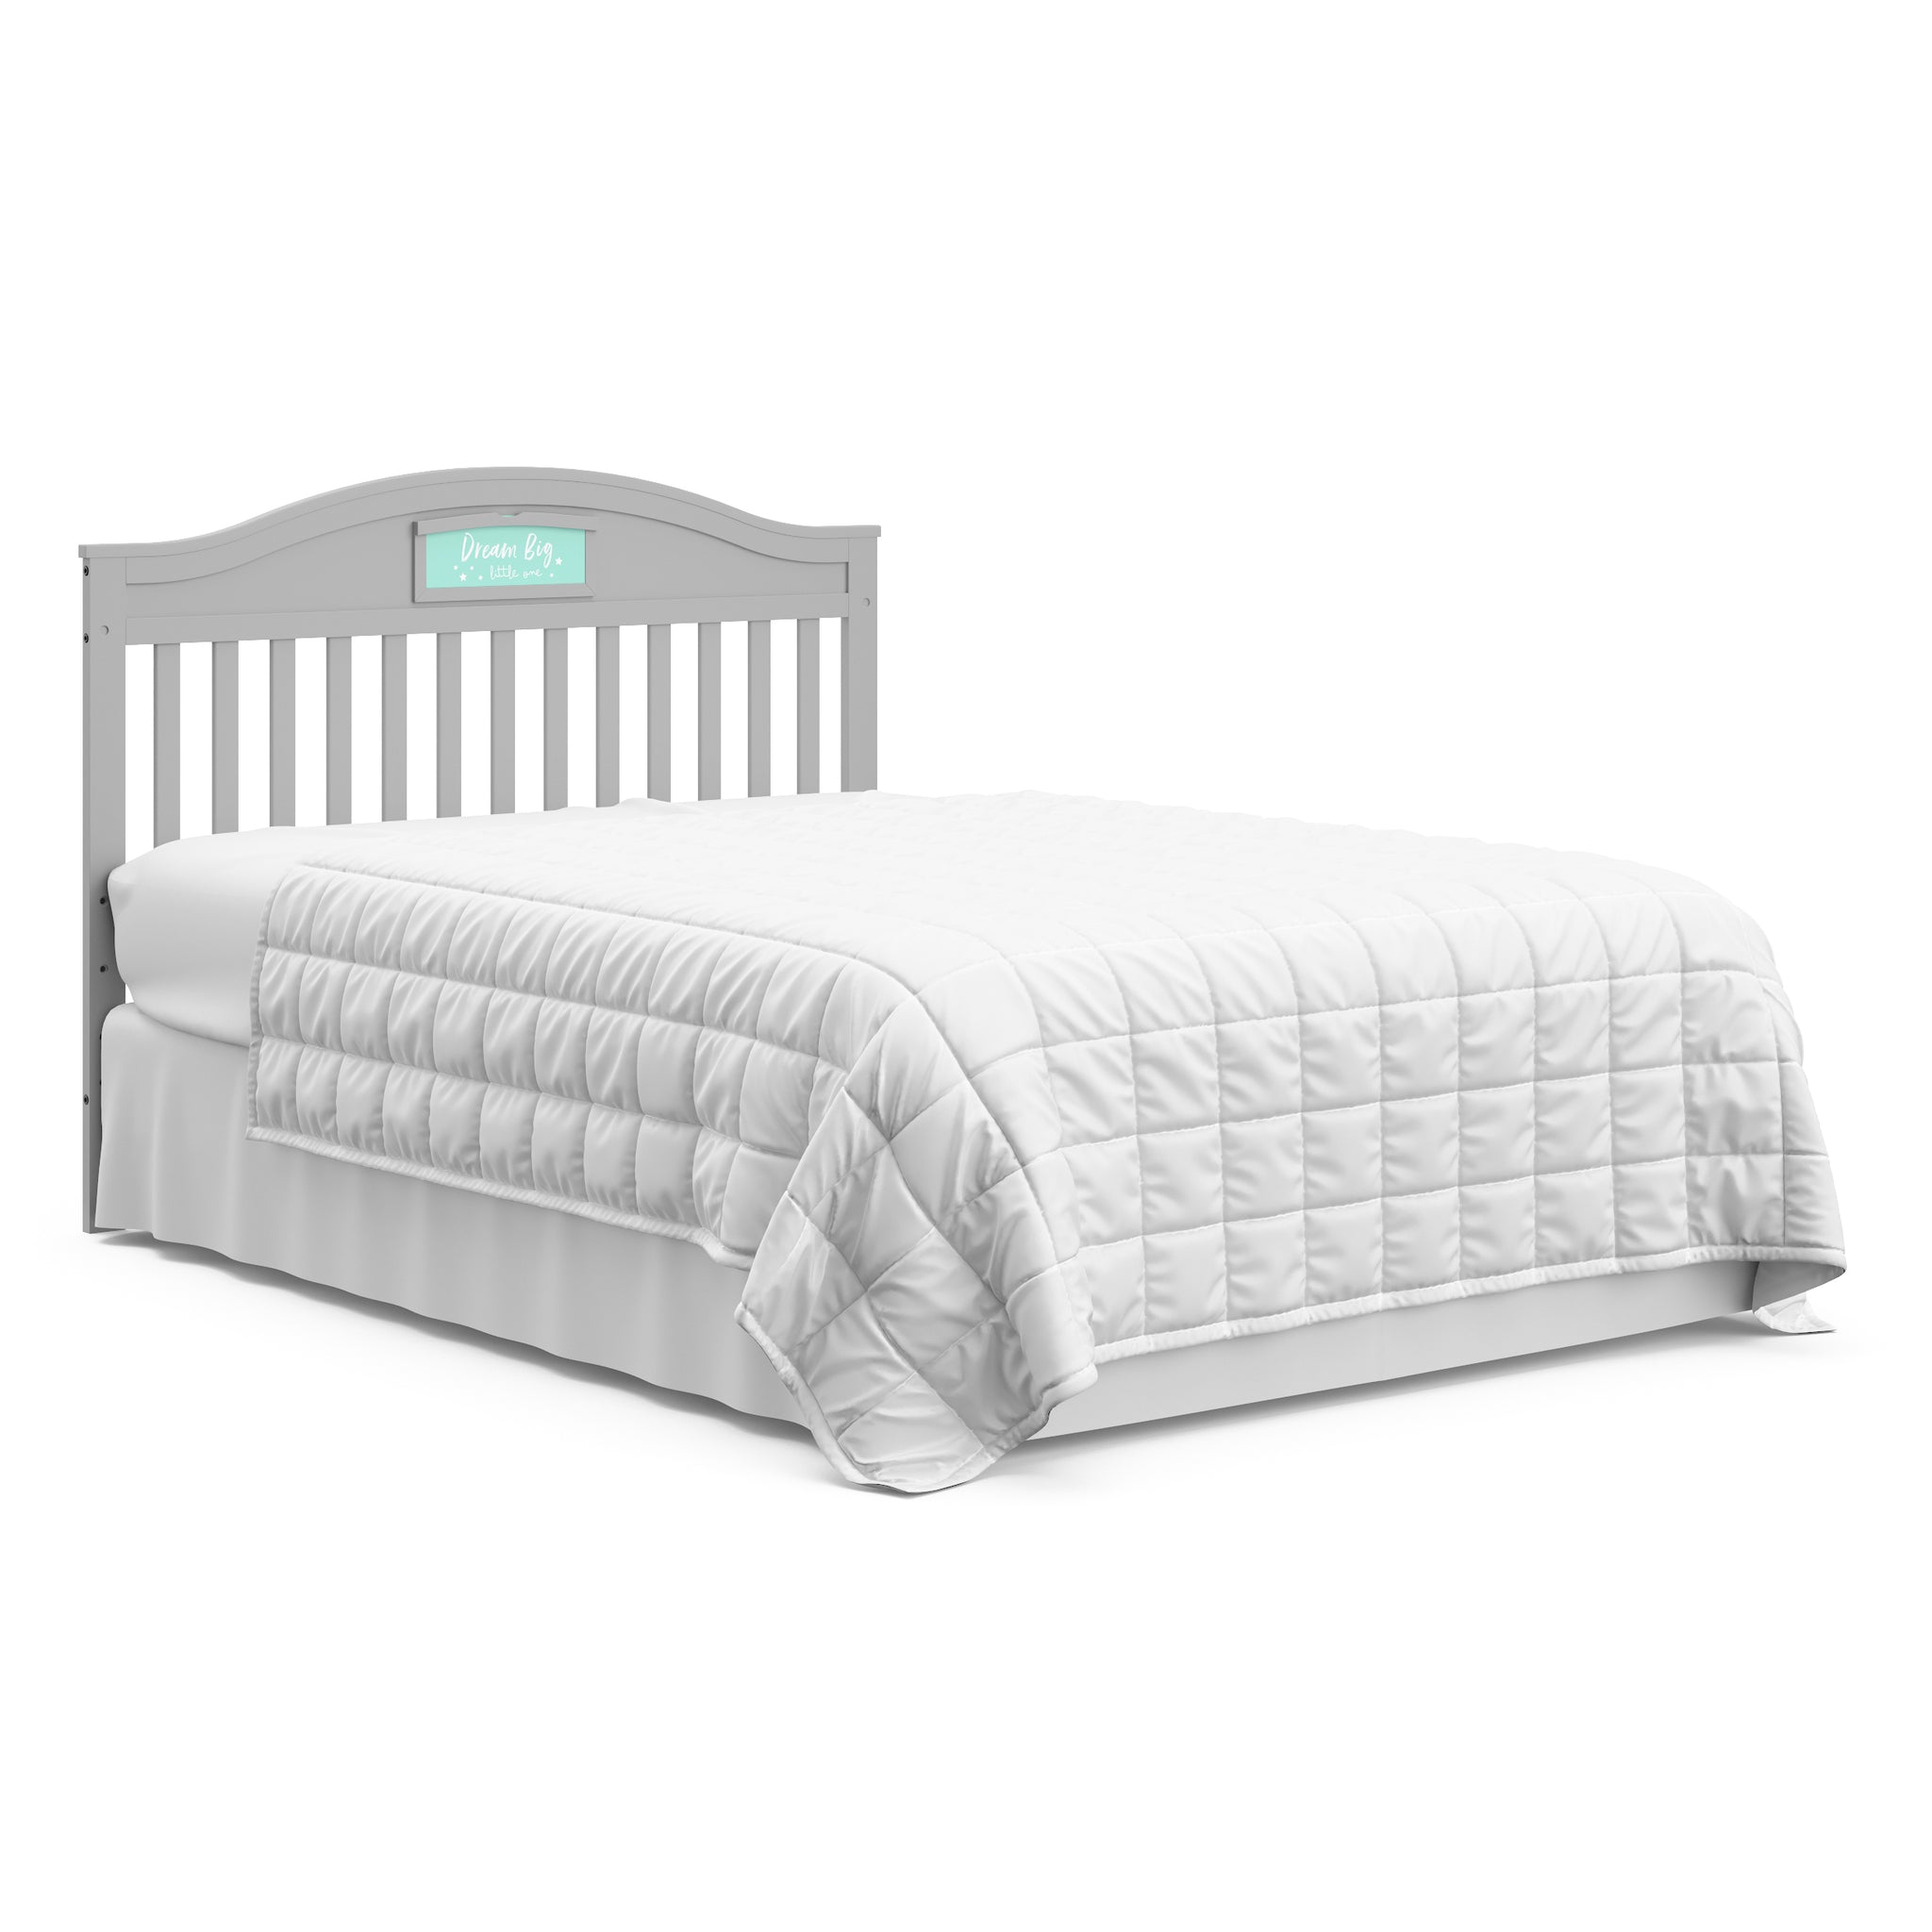 Pebble gray crib with drawer in full-size bed with headboard conversion